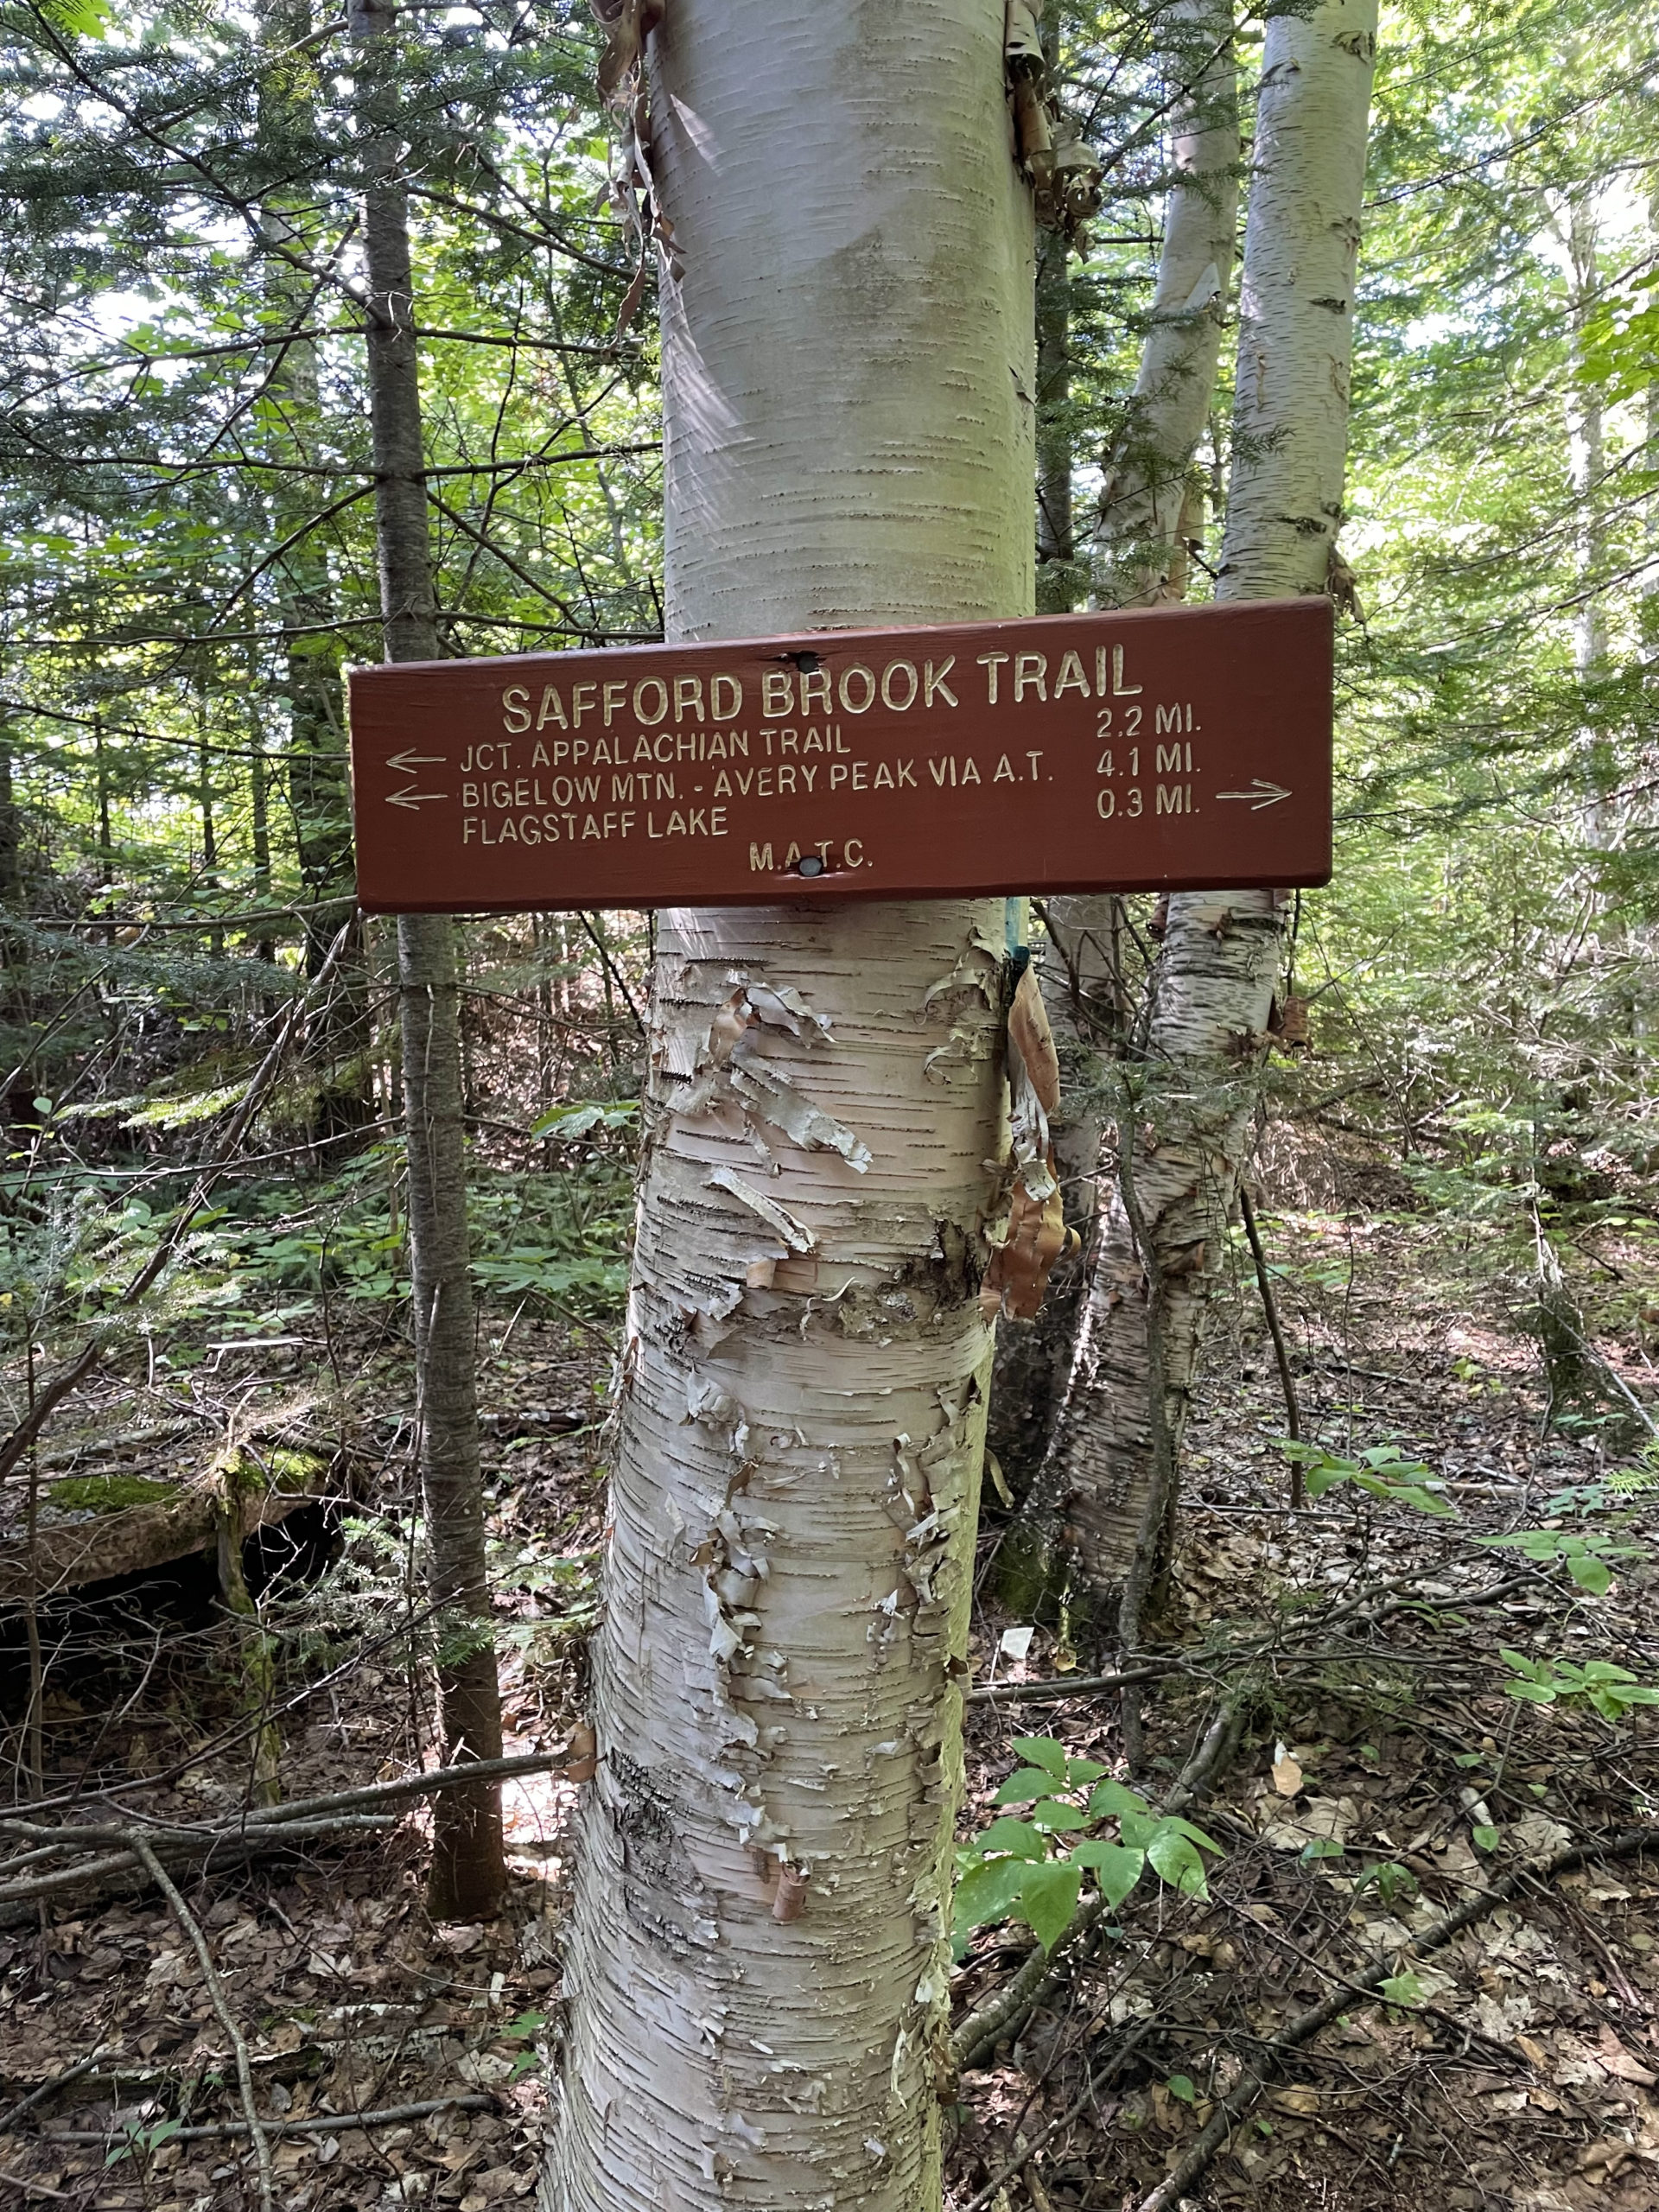 Safford Brook Trail sign, seen while hiking Bigelow Mountain in Western Maine